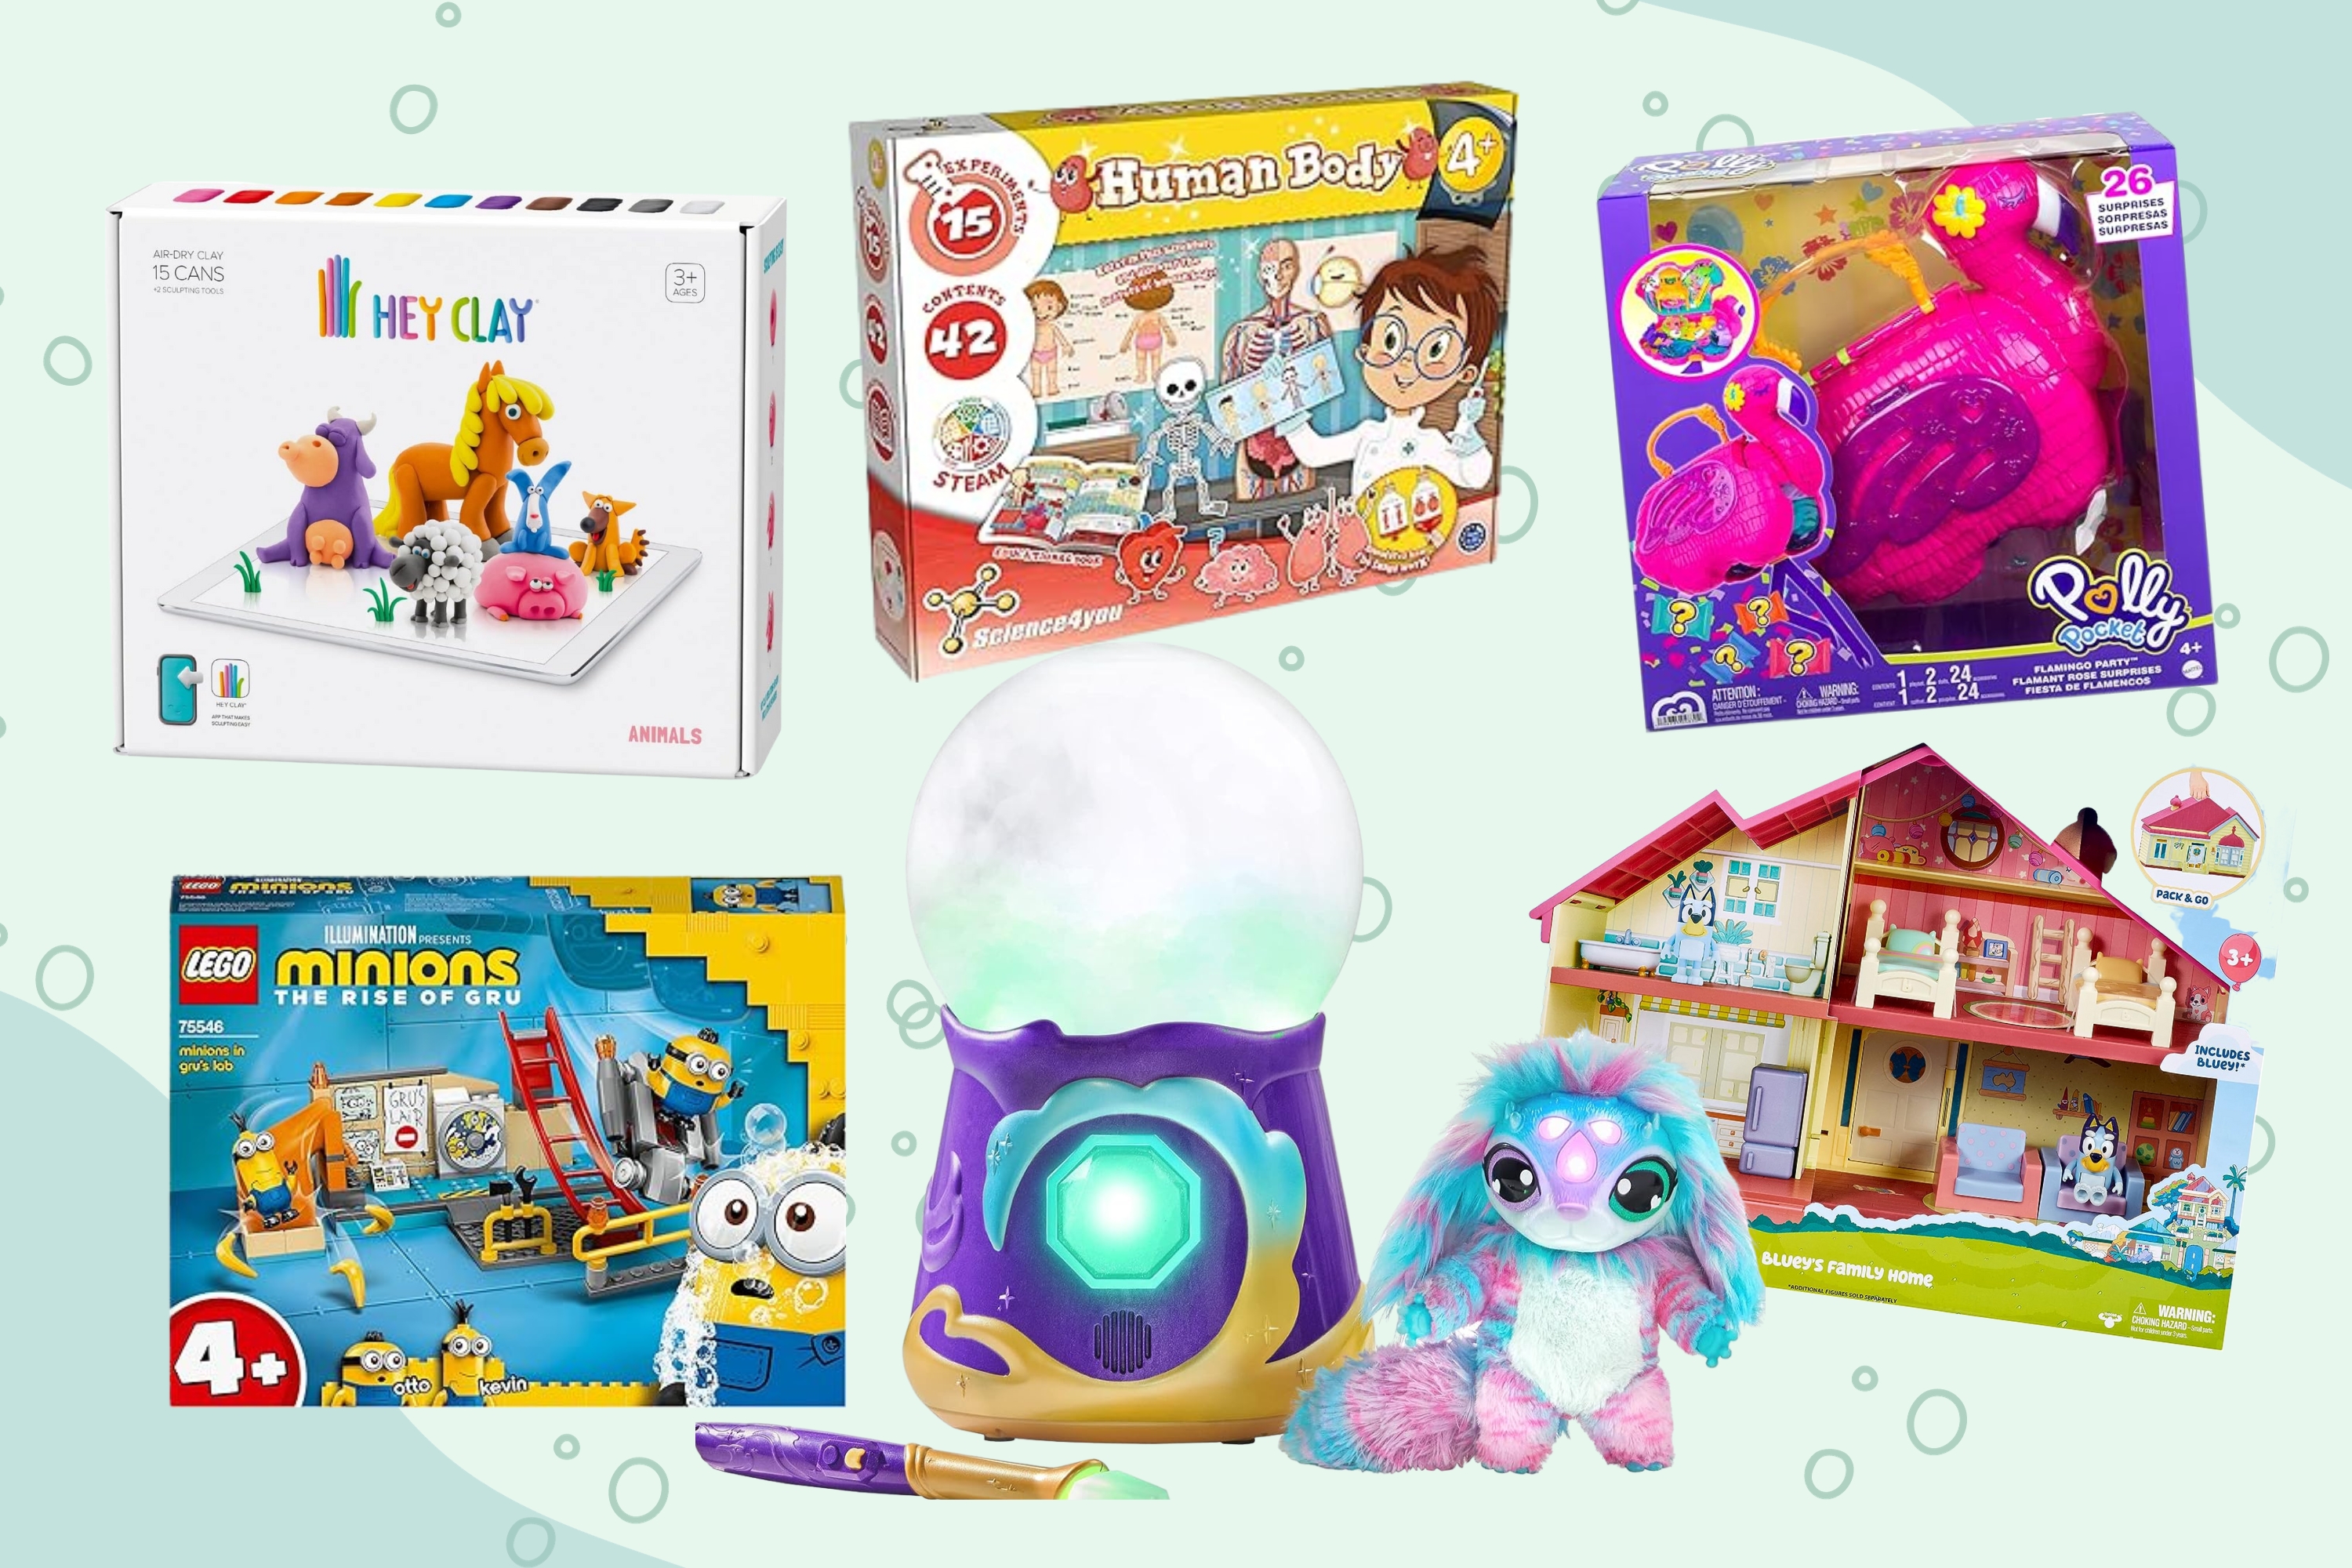 Tom's Guide Toy Awards 2023 — the best new toys and games of the